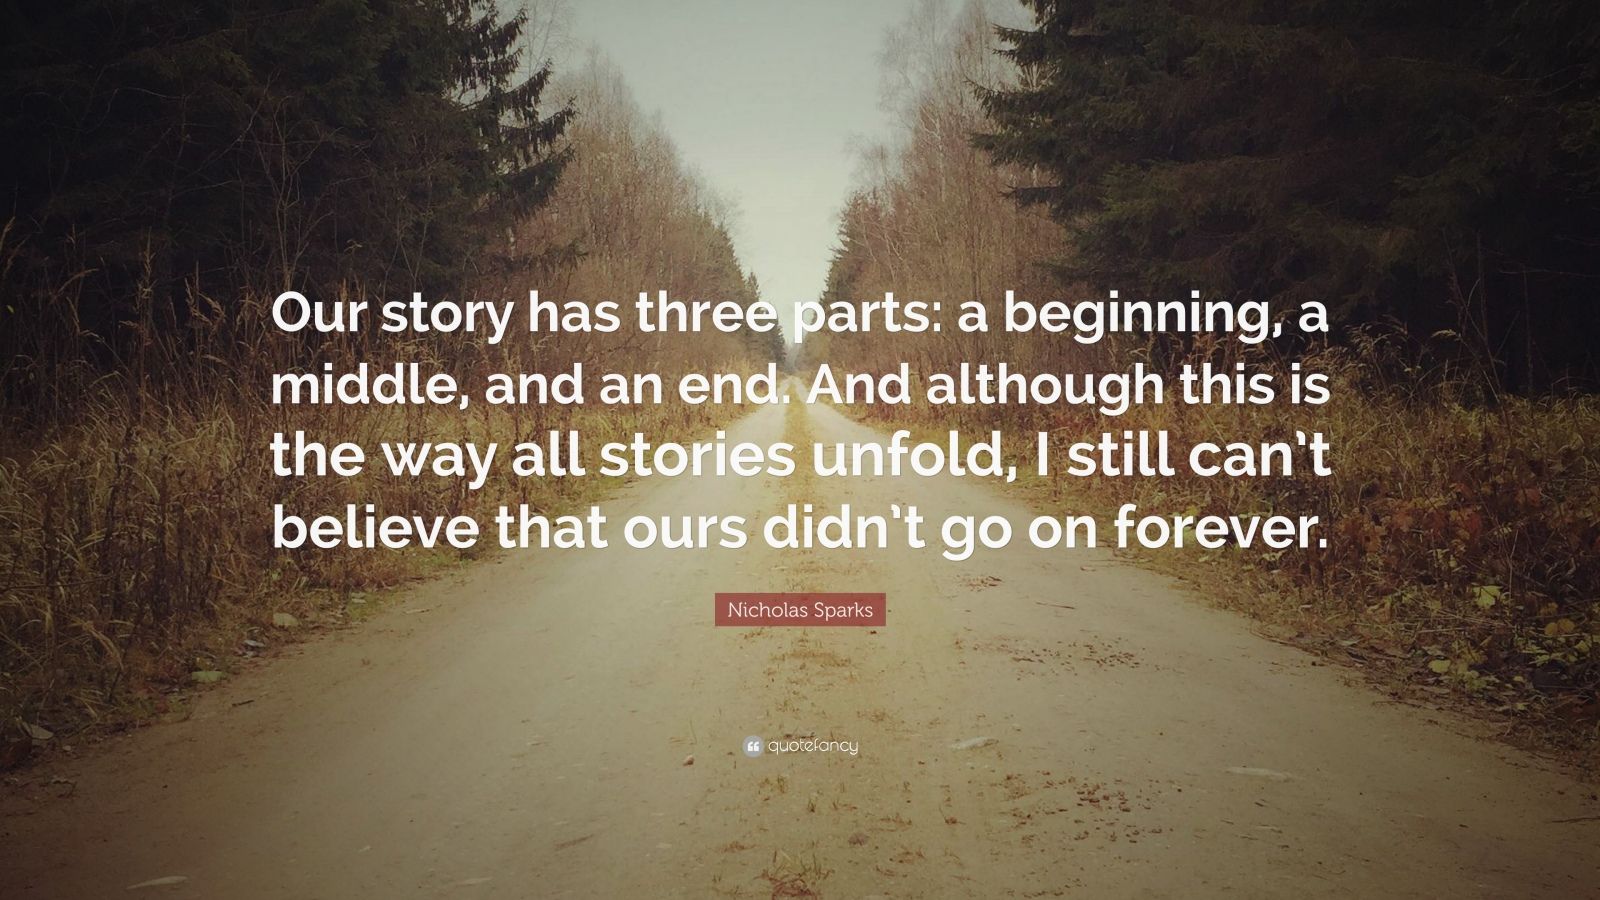 Nicholas Sparks Quote: “Our story has three parts: a beginning, a